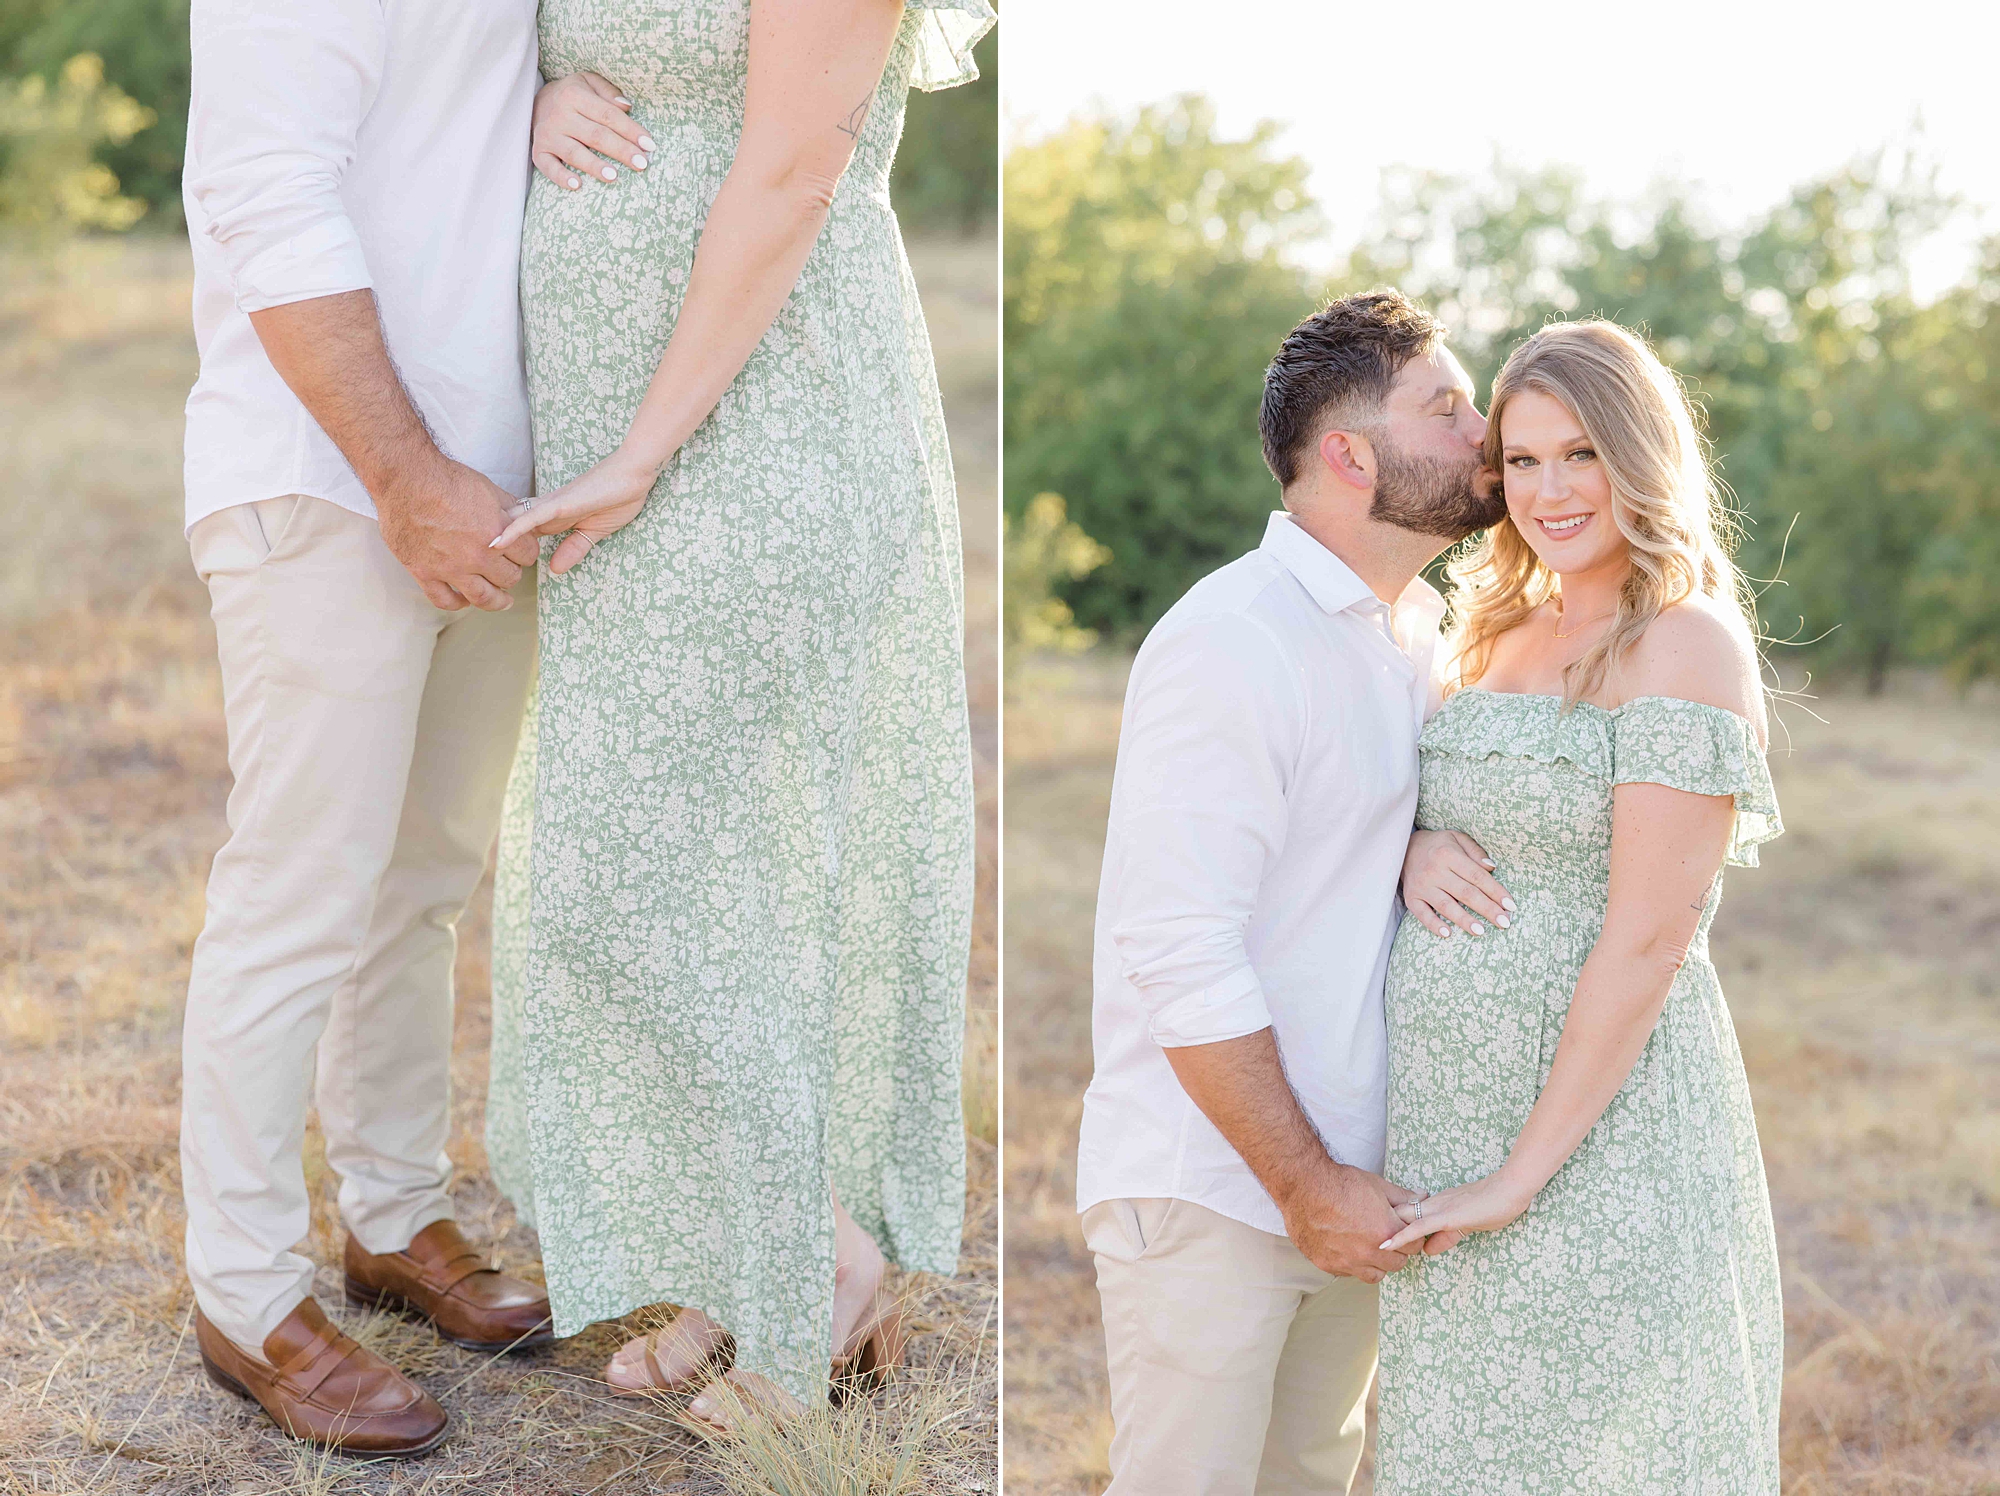 man leans to kiss woman's cheek during maternity photos